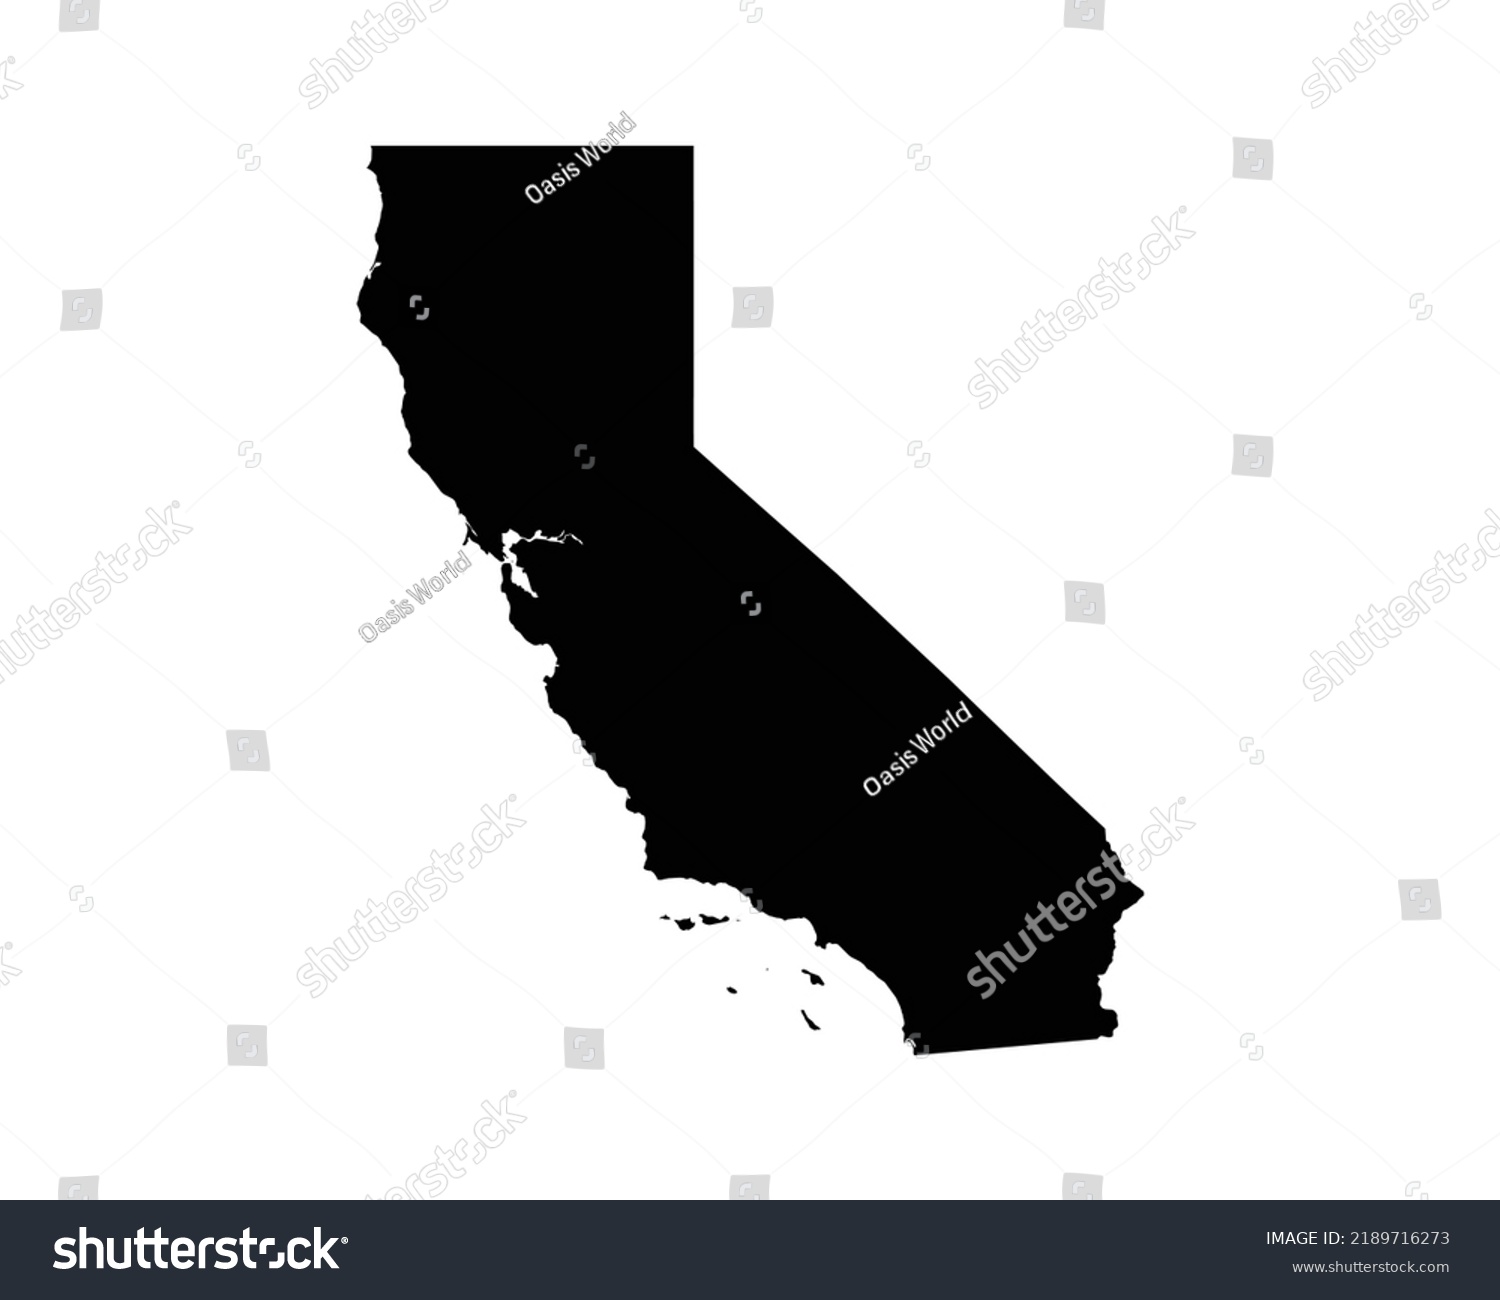 SVG of California US Map. CA USA State Map. Black and White Californian State Border Boundary Line Outline Geography Territory Shape Vector Illustration EPS Clipart svg